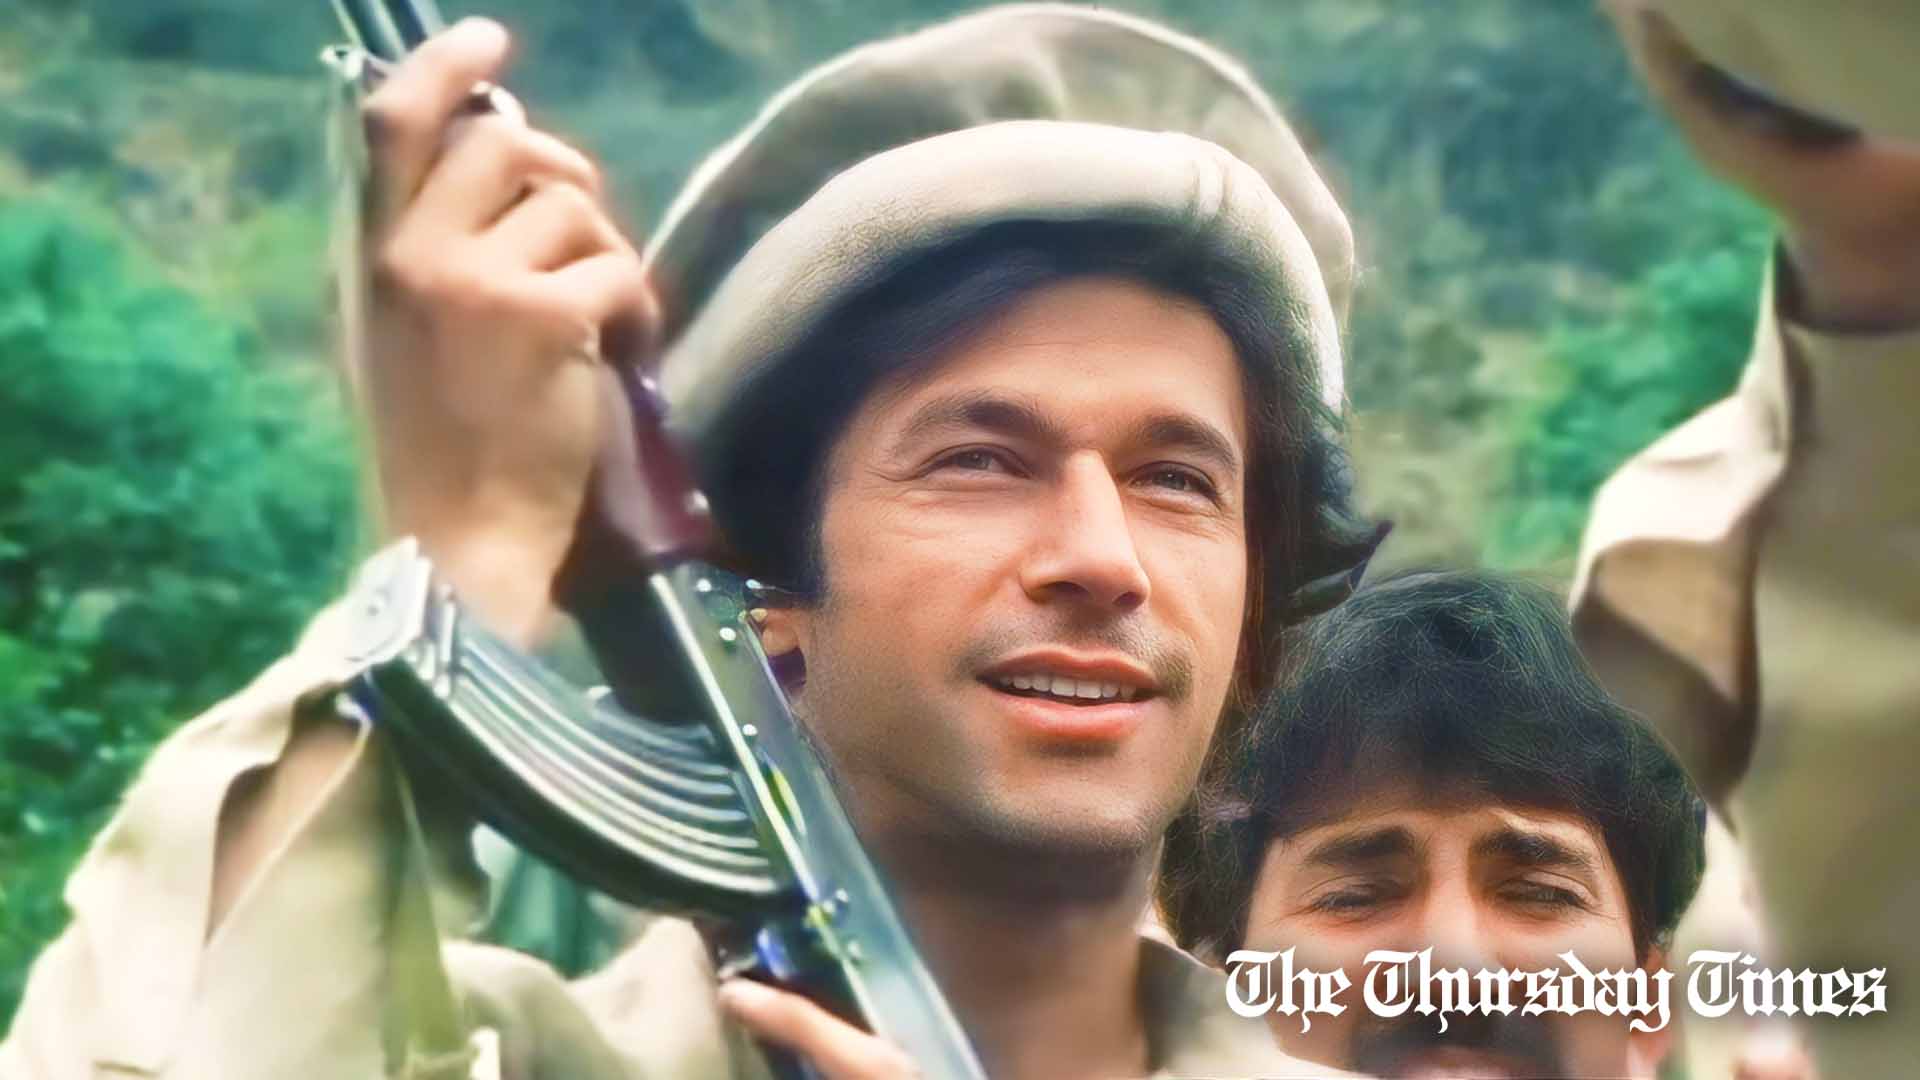 A file photo is shown of PTI chair Imran Khan at KP in 1992. — FILE/THE THURSDAY TIMES